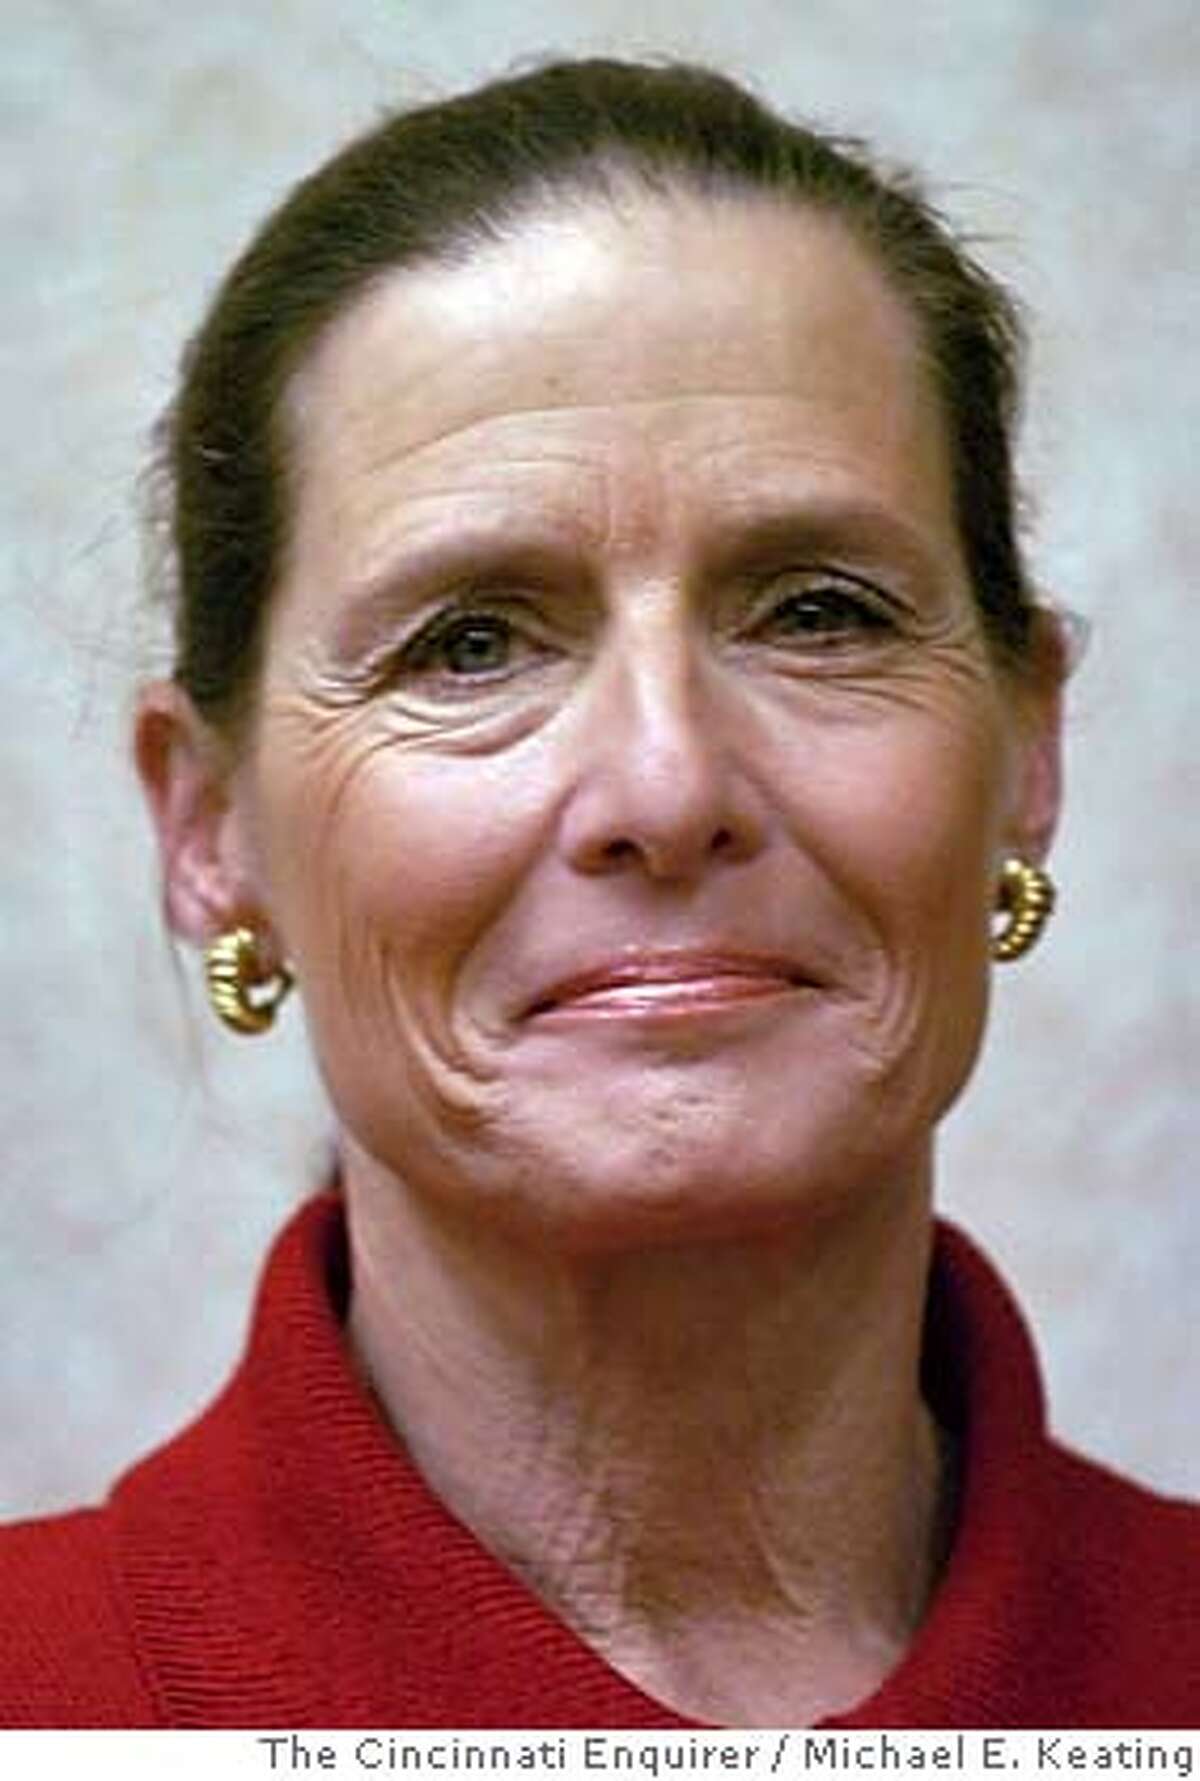 **FILE** Rep. Jean Schmidt, R-Ohio, is seen May 23, 2005, in Cincinnati. Schmidt apologized Tuesday, Nov. 22, 2005, for her sharp comments about a fellow lawmaker's call to withdraw troops from Iraq, which caused a furor in the House. Schmidt was booed off the House floor Friday, Nov. 18, 2005, after she criticized U.S. Rep. John Murtha, saying a Republican state legislator told her to tell the Pennsylvania congressman that "cowards cut and run, Marines never do." (AP Photo/The Cincinnati Enquirer, Michael E. Keating) ** ** MAY 23, 2005, FILE PHOTO,